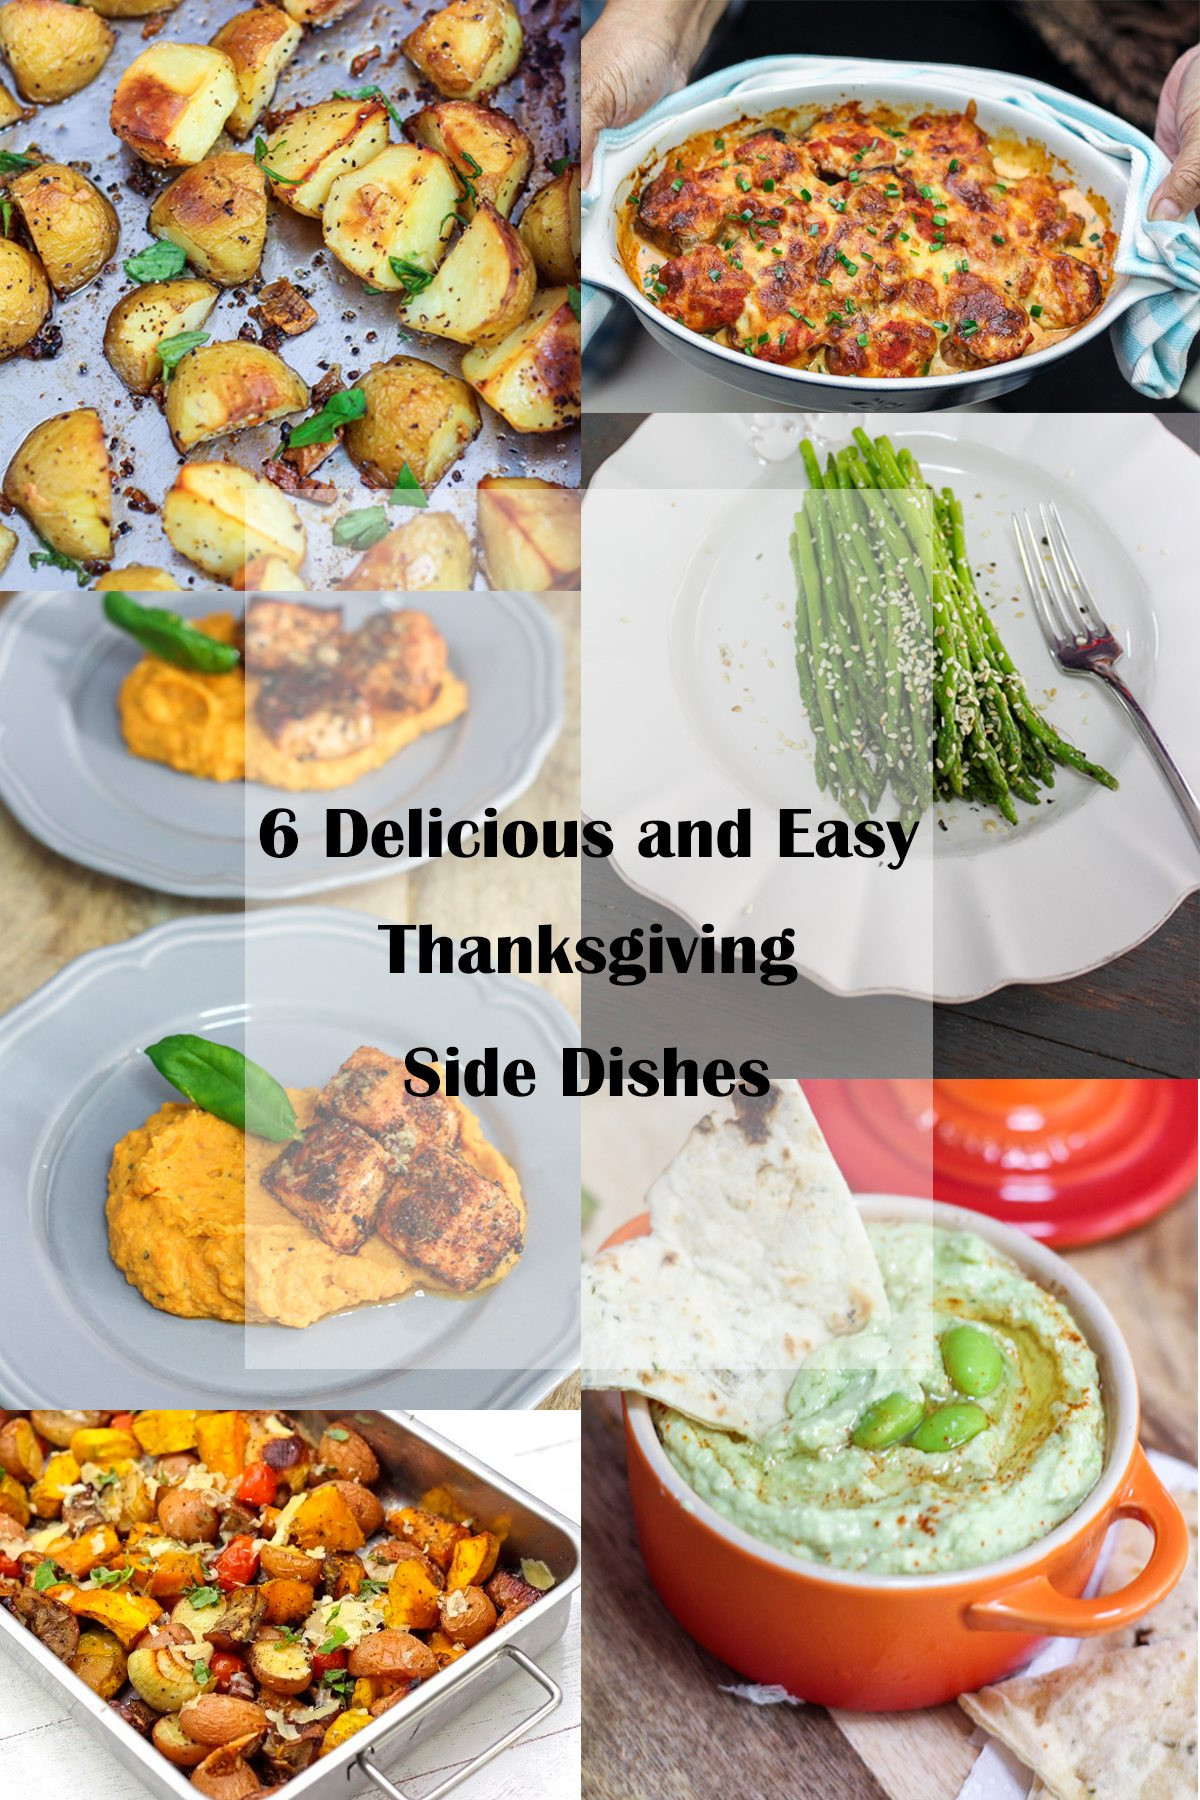 Traditional Thanksgiving Side Dishes
 6 Delicious and Easy Thanksgiving Side Dishes